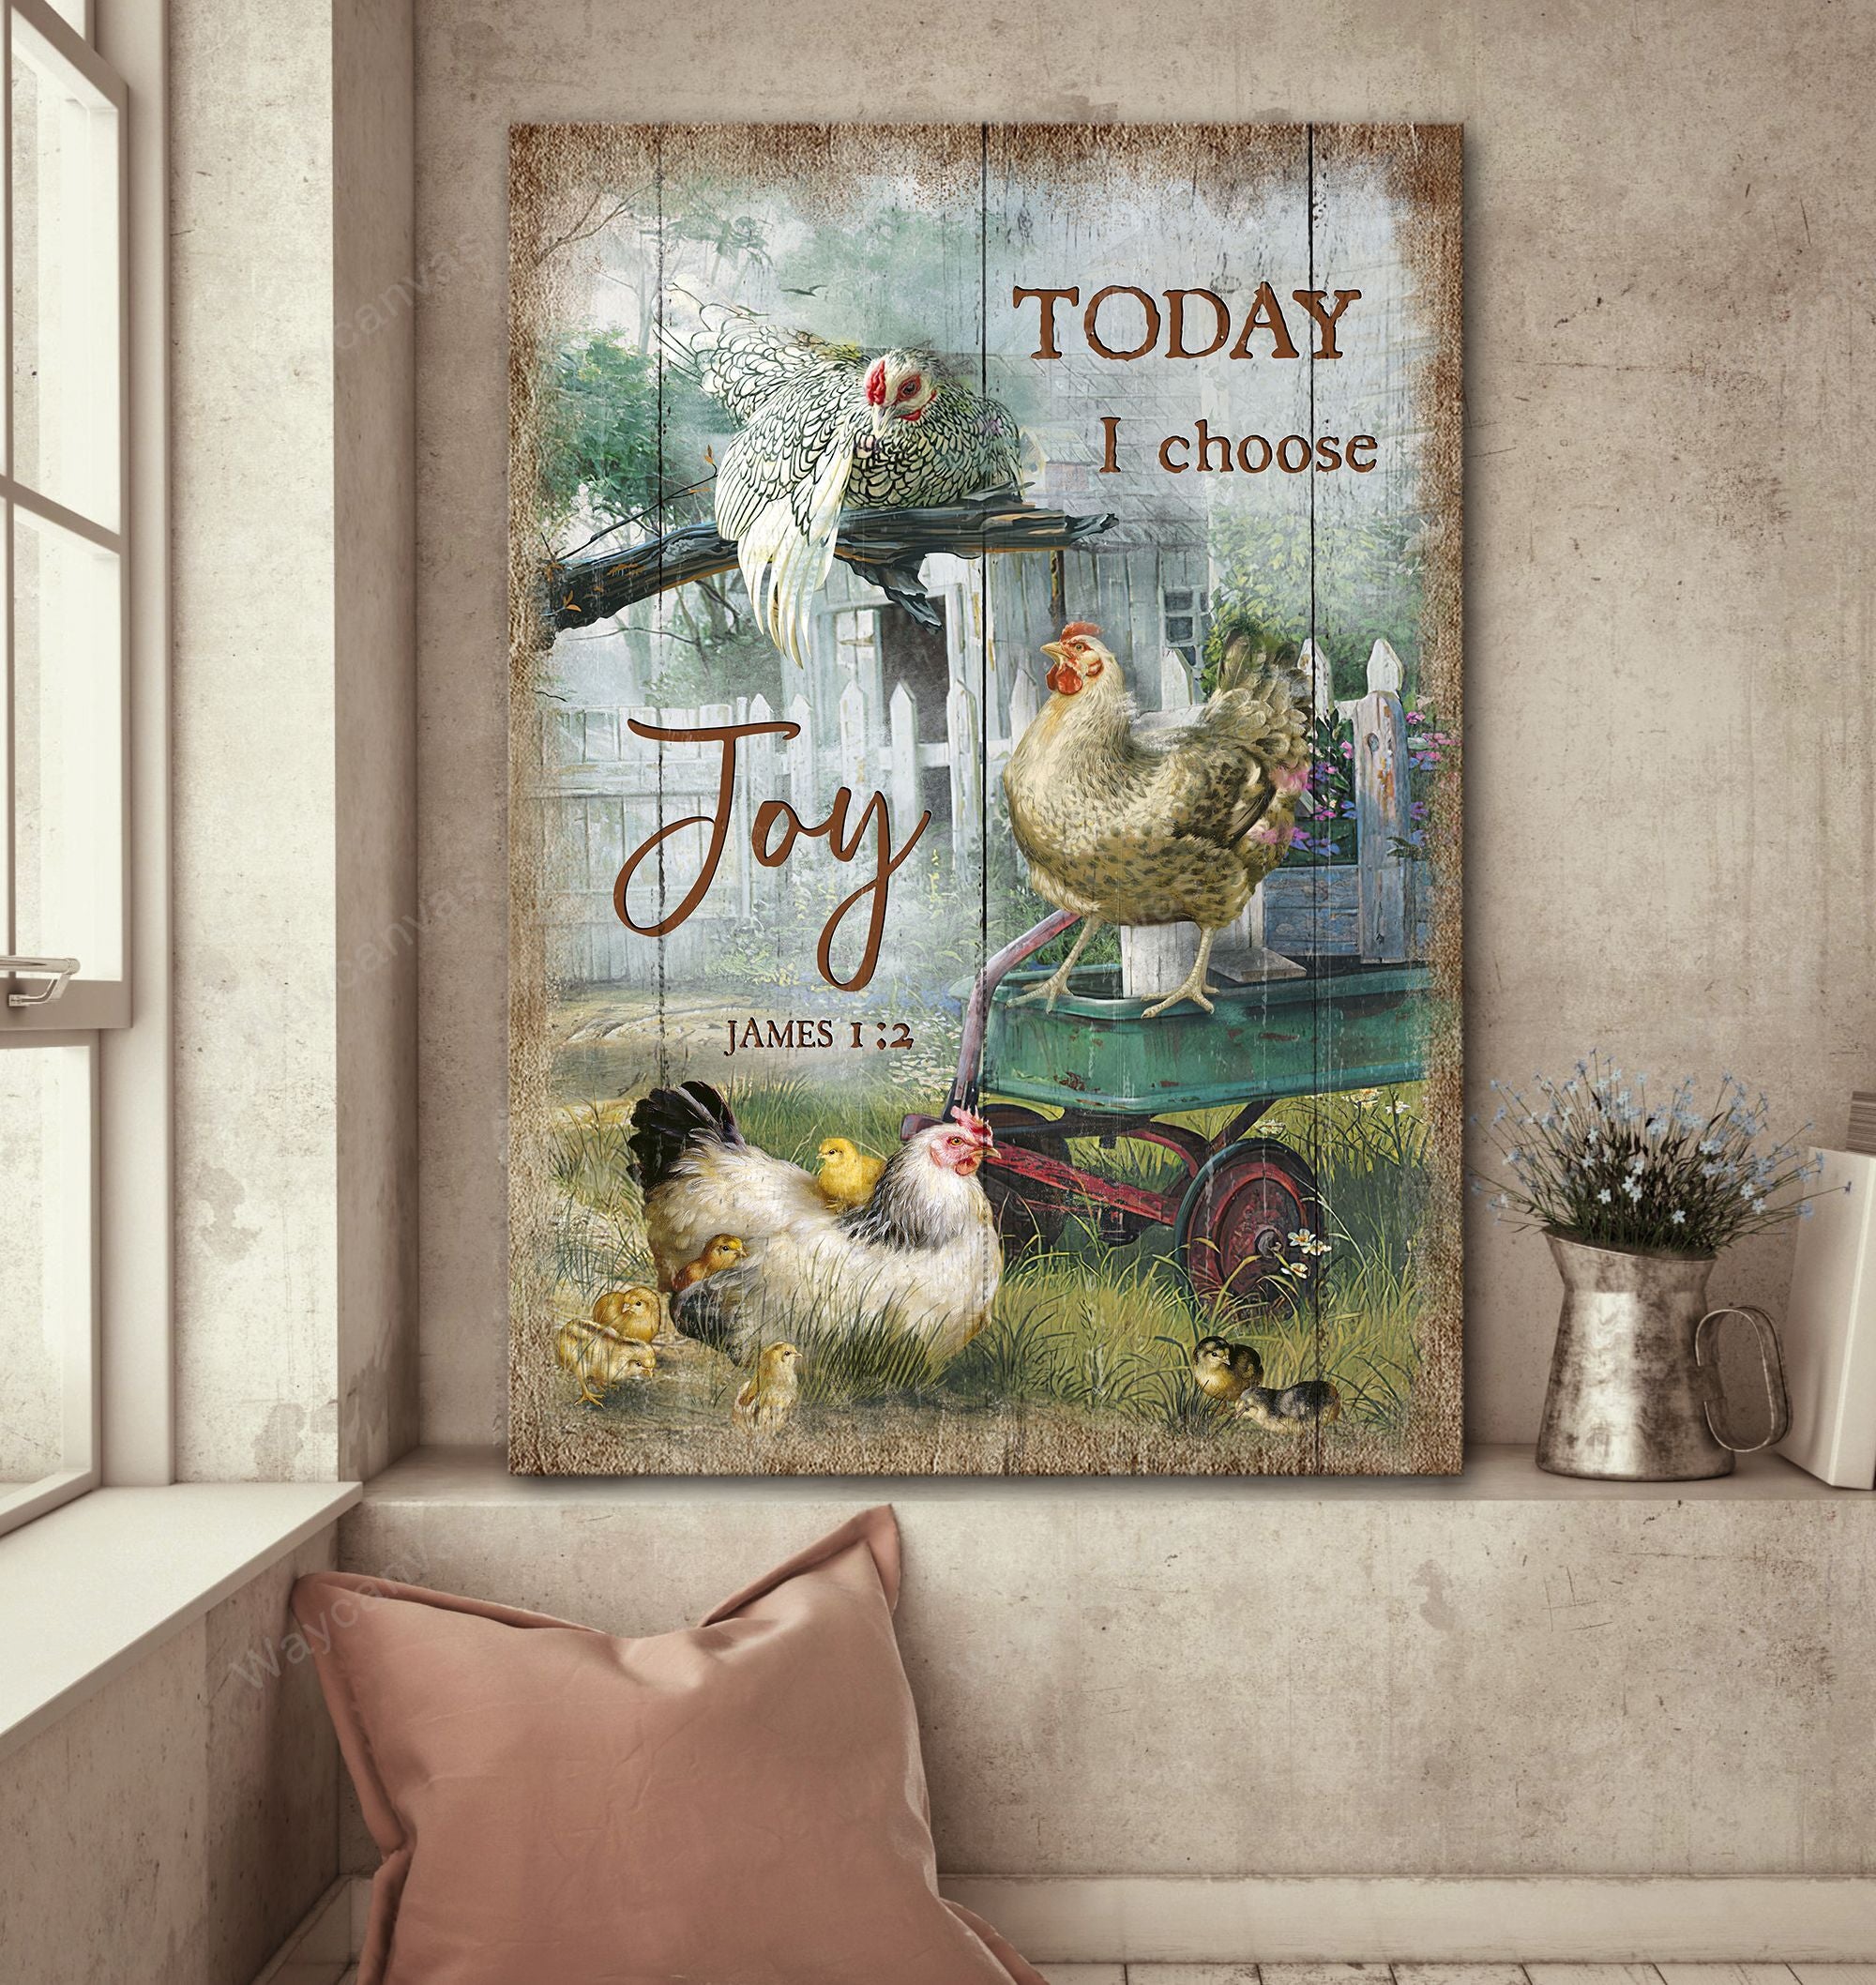 Chicken drawing, Chick painting, Green meadow, Today I choose joy - Jesus Portrait Canvas Prints, Wall Art